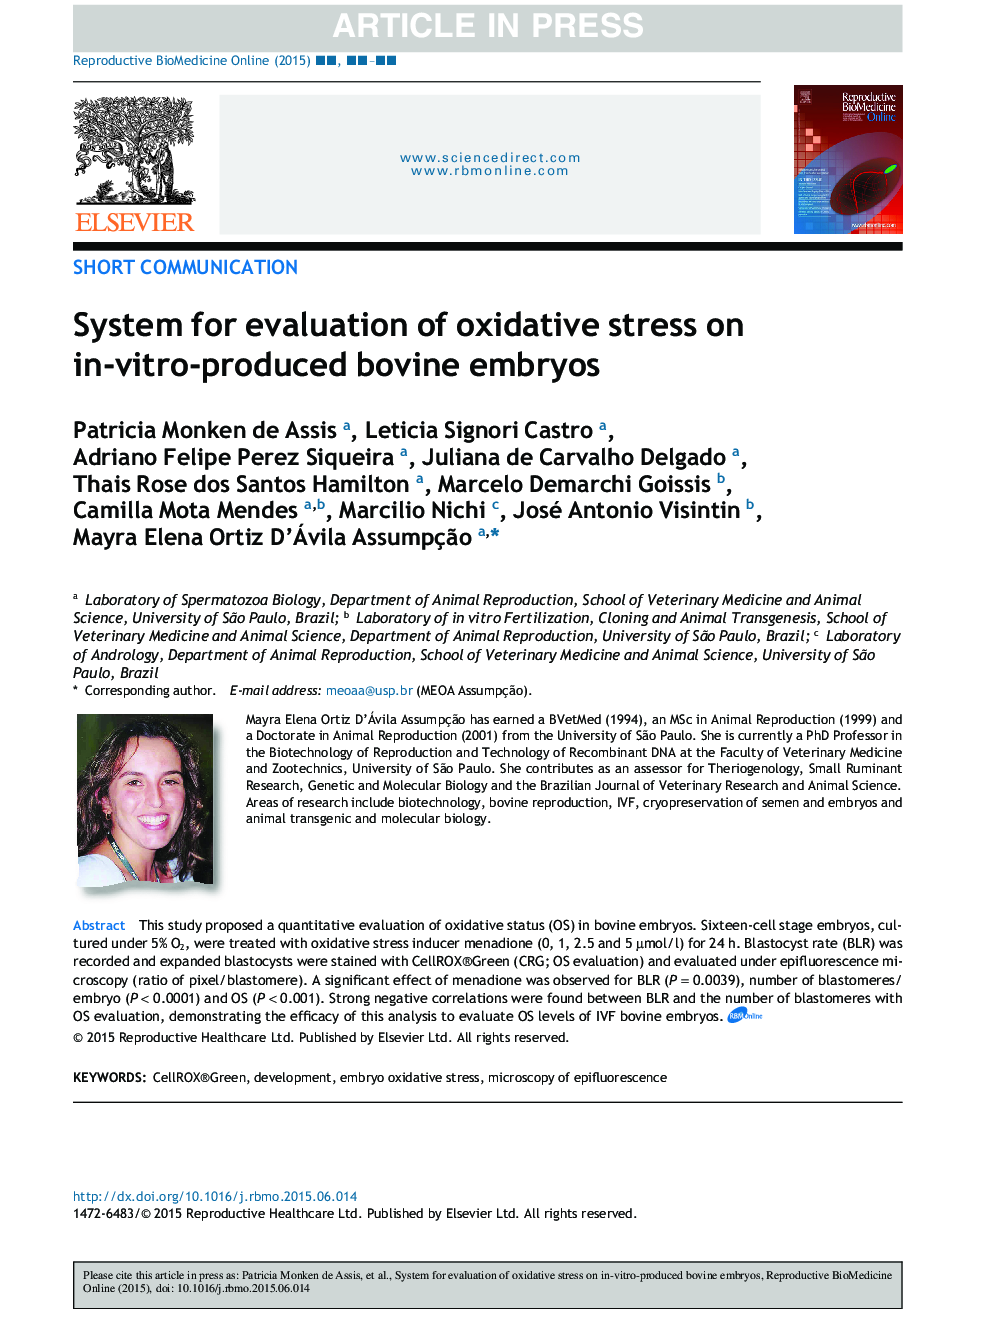 System for evaluation of oxidative stress on in-vitro-produced bovine embryos